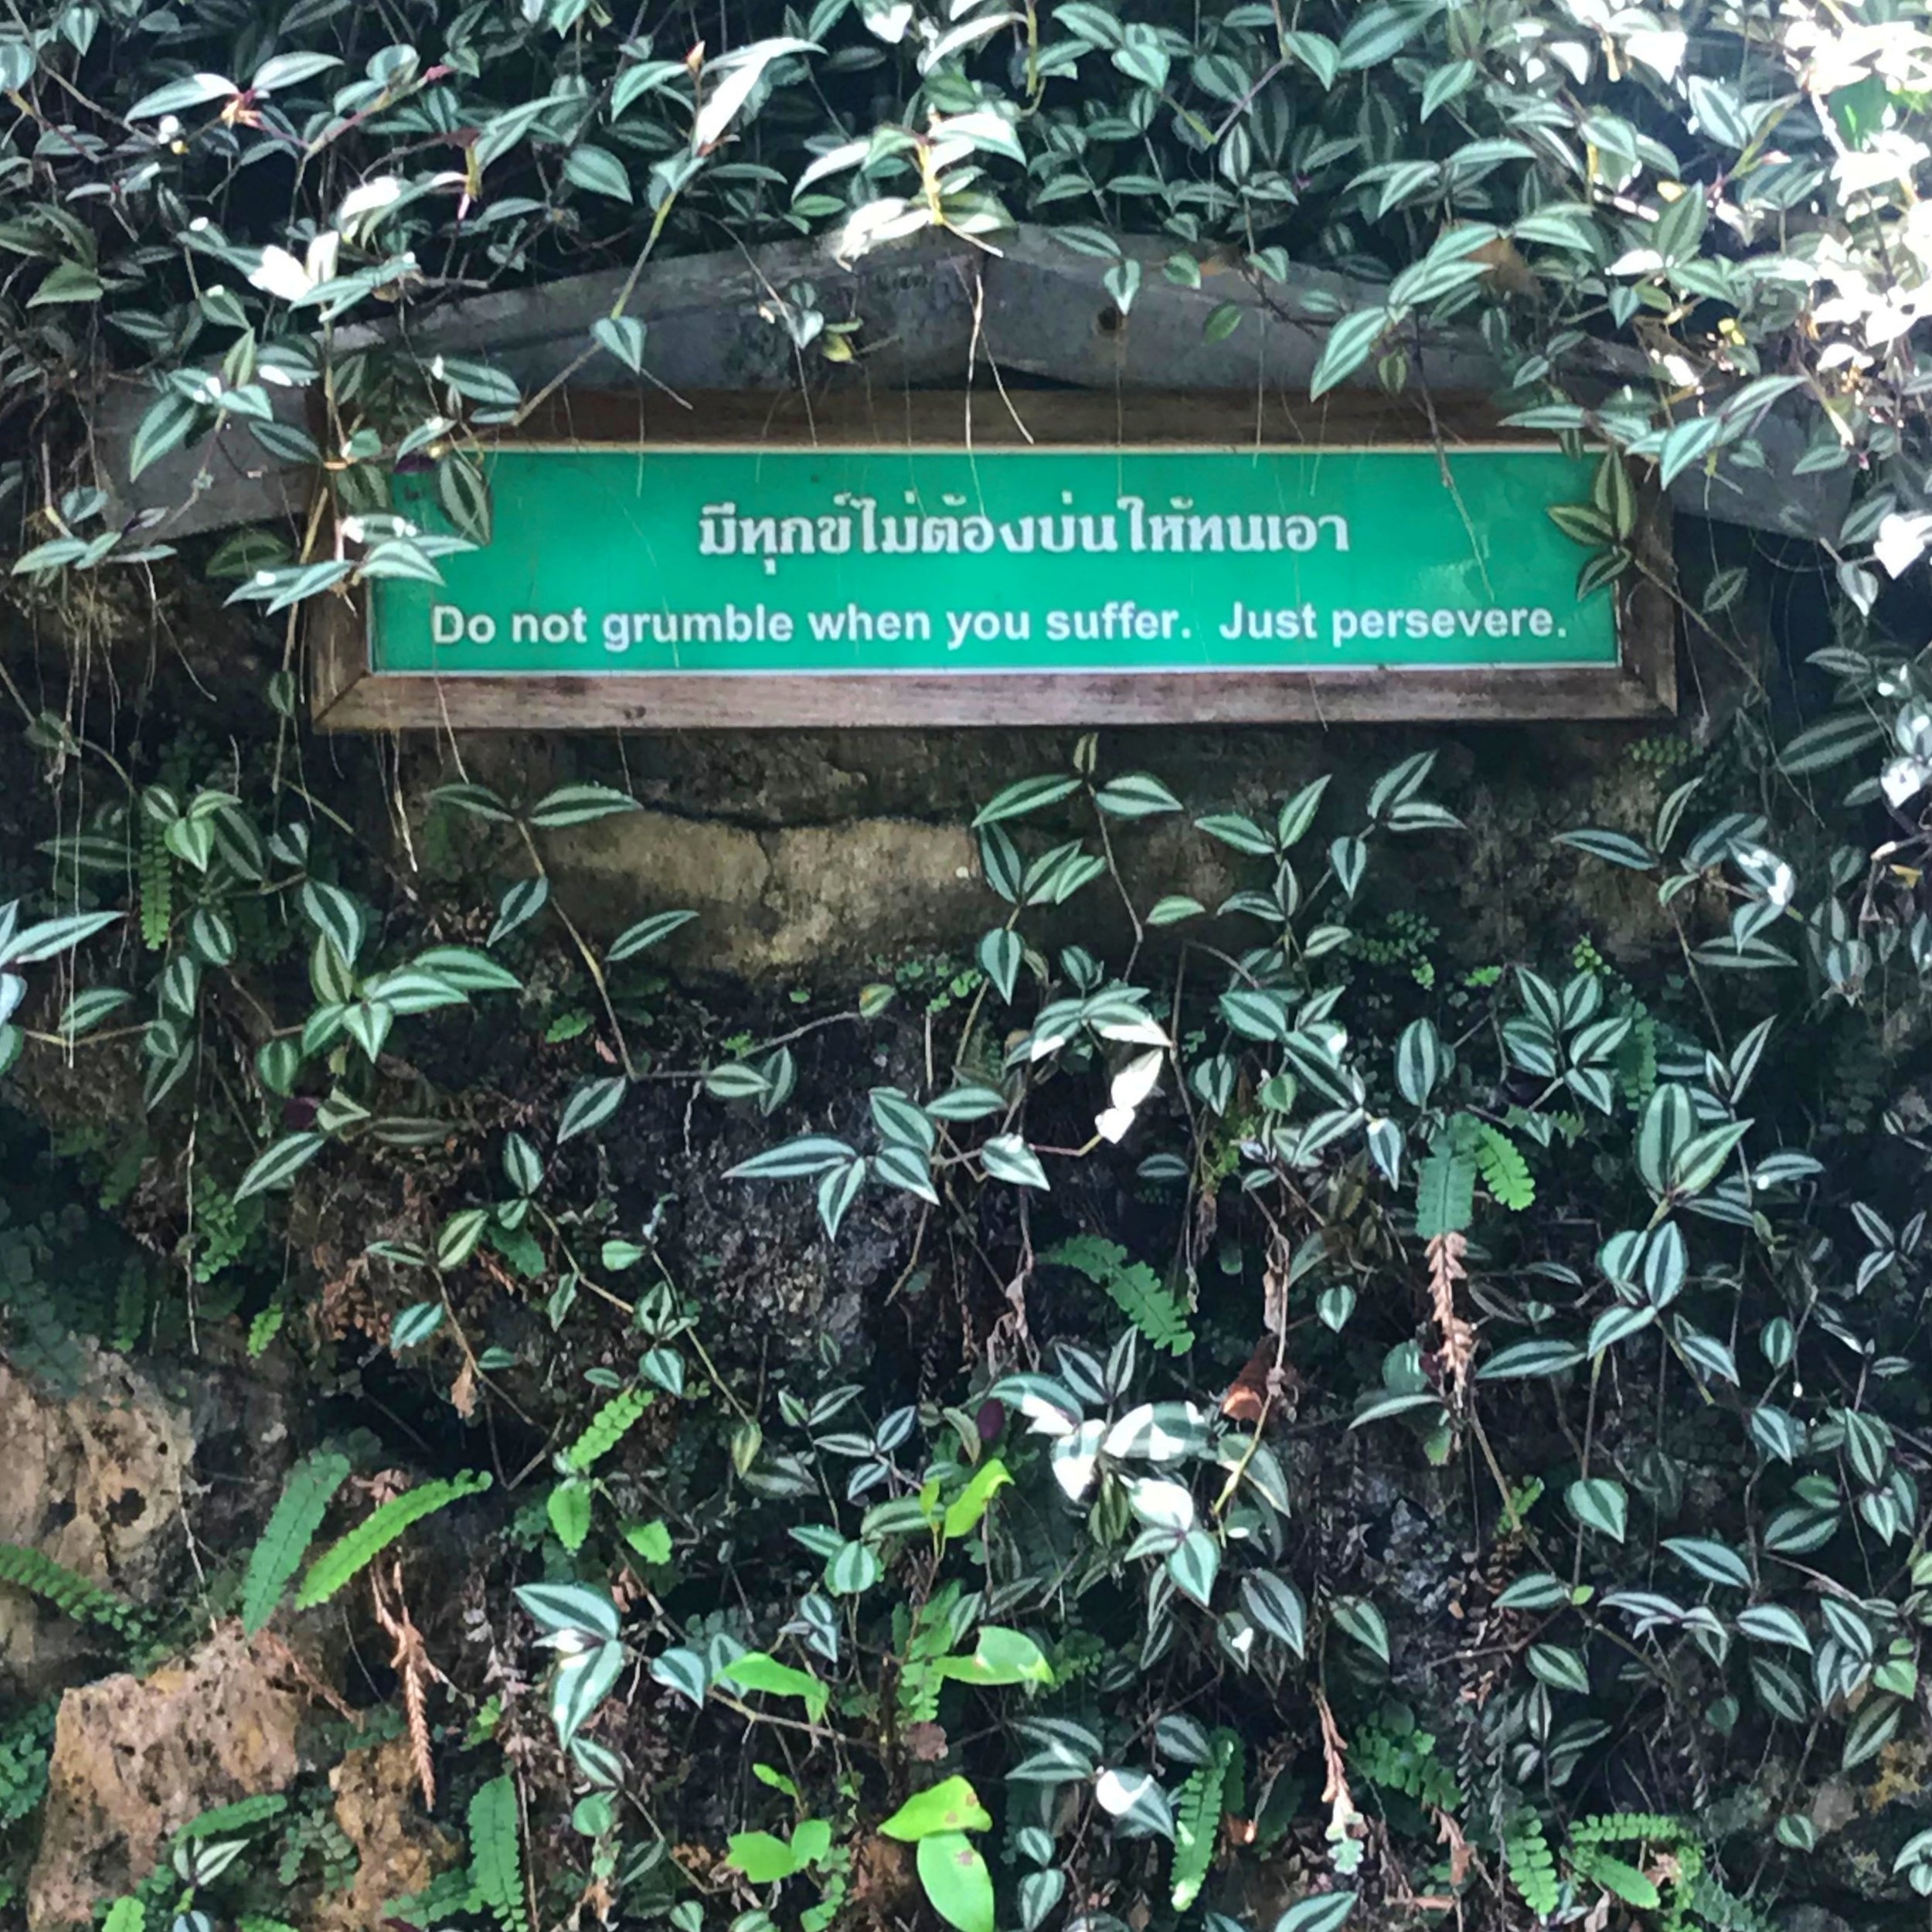 inspirational sign in Chiang Dao Thailang